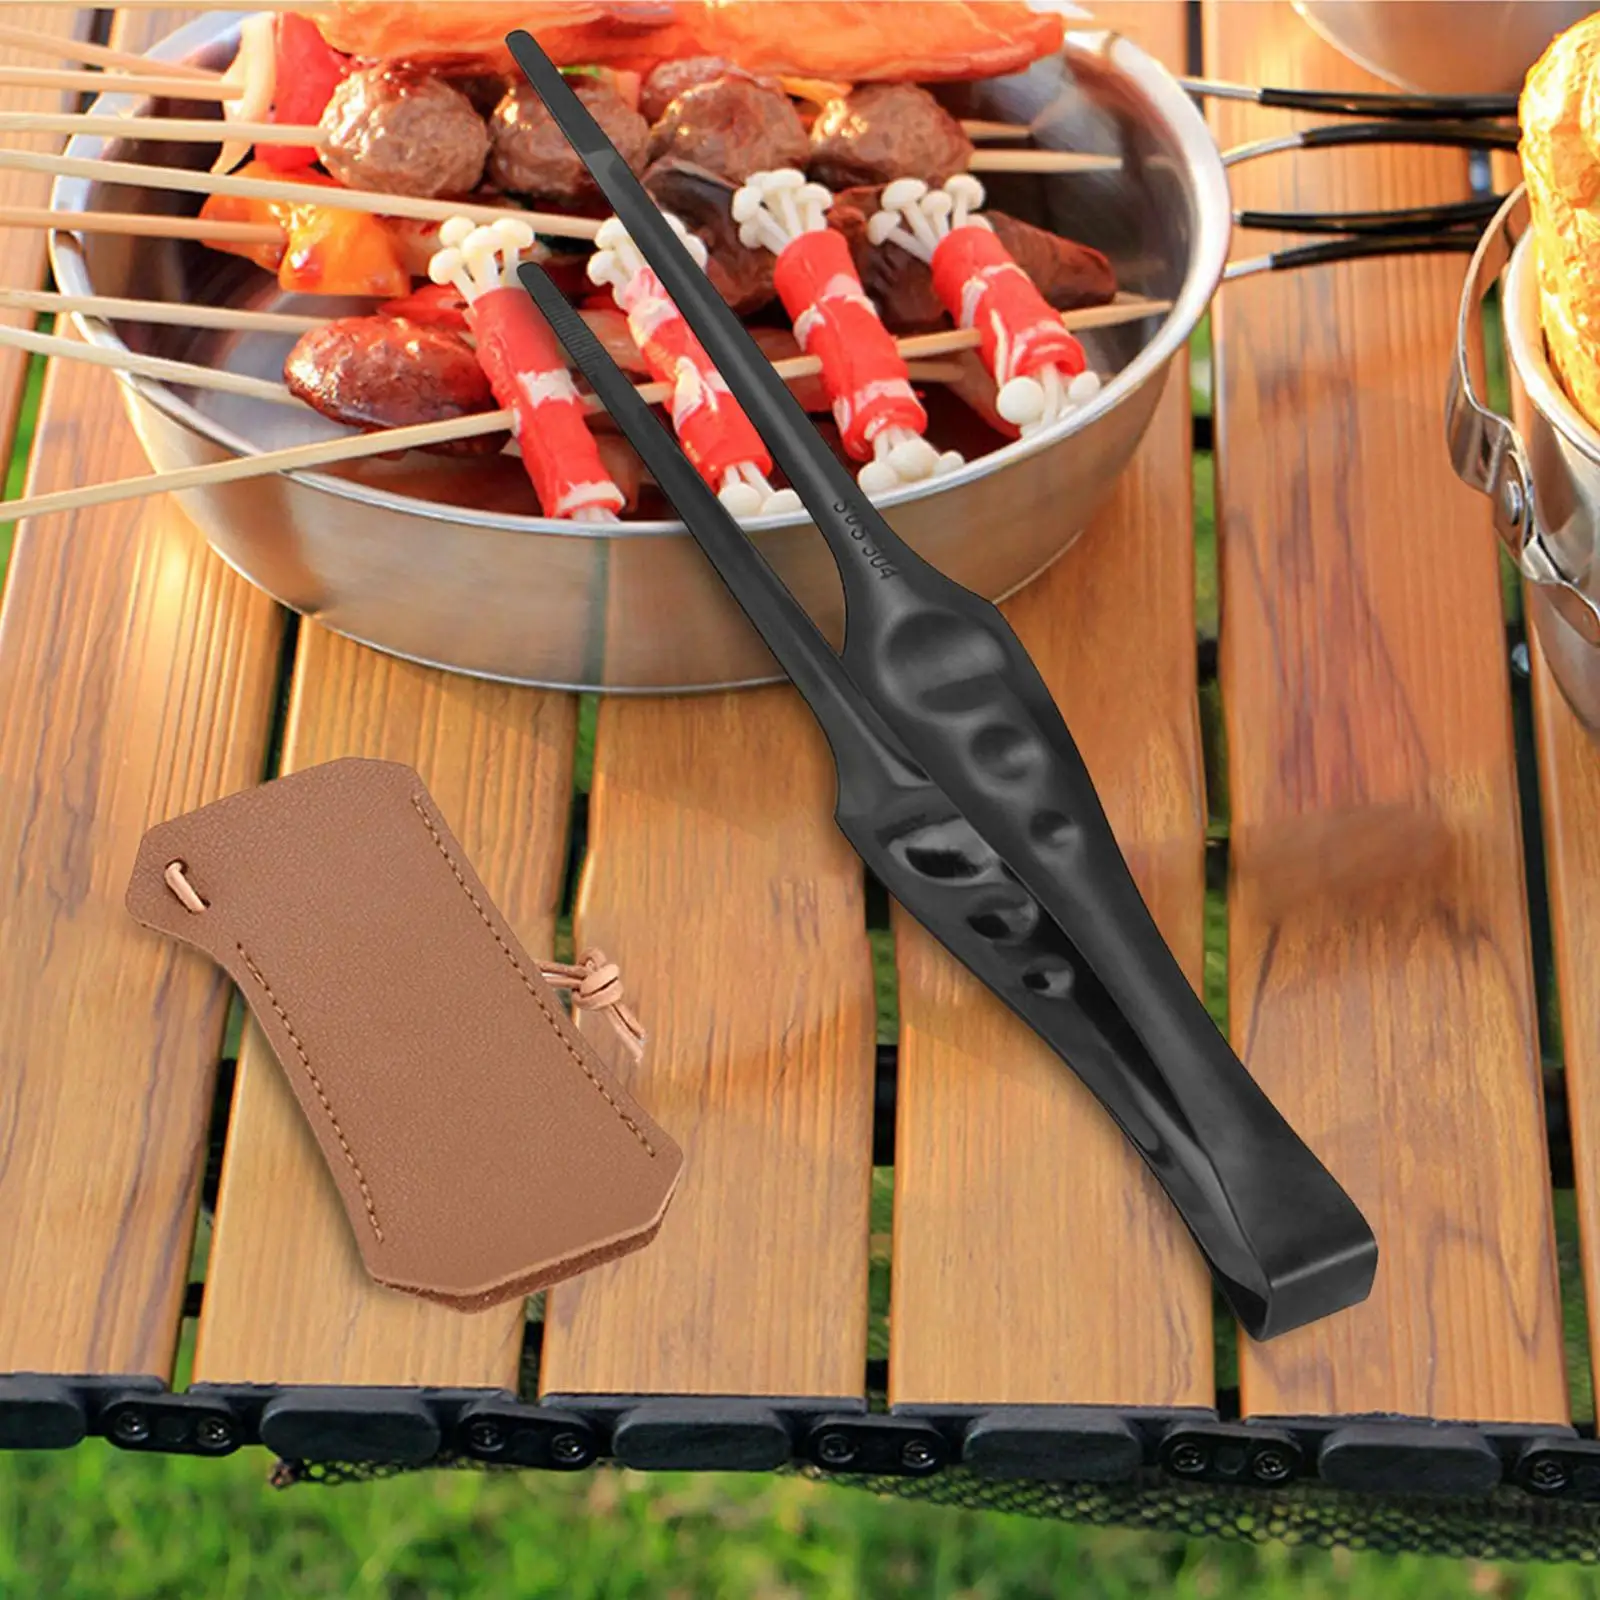 Stainless Steel Grill Tongs Grilling Baking Barbecue Kitchen Camping Tongs